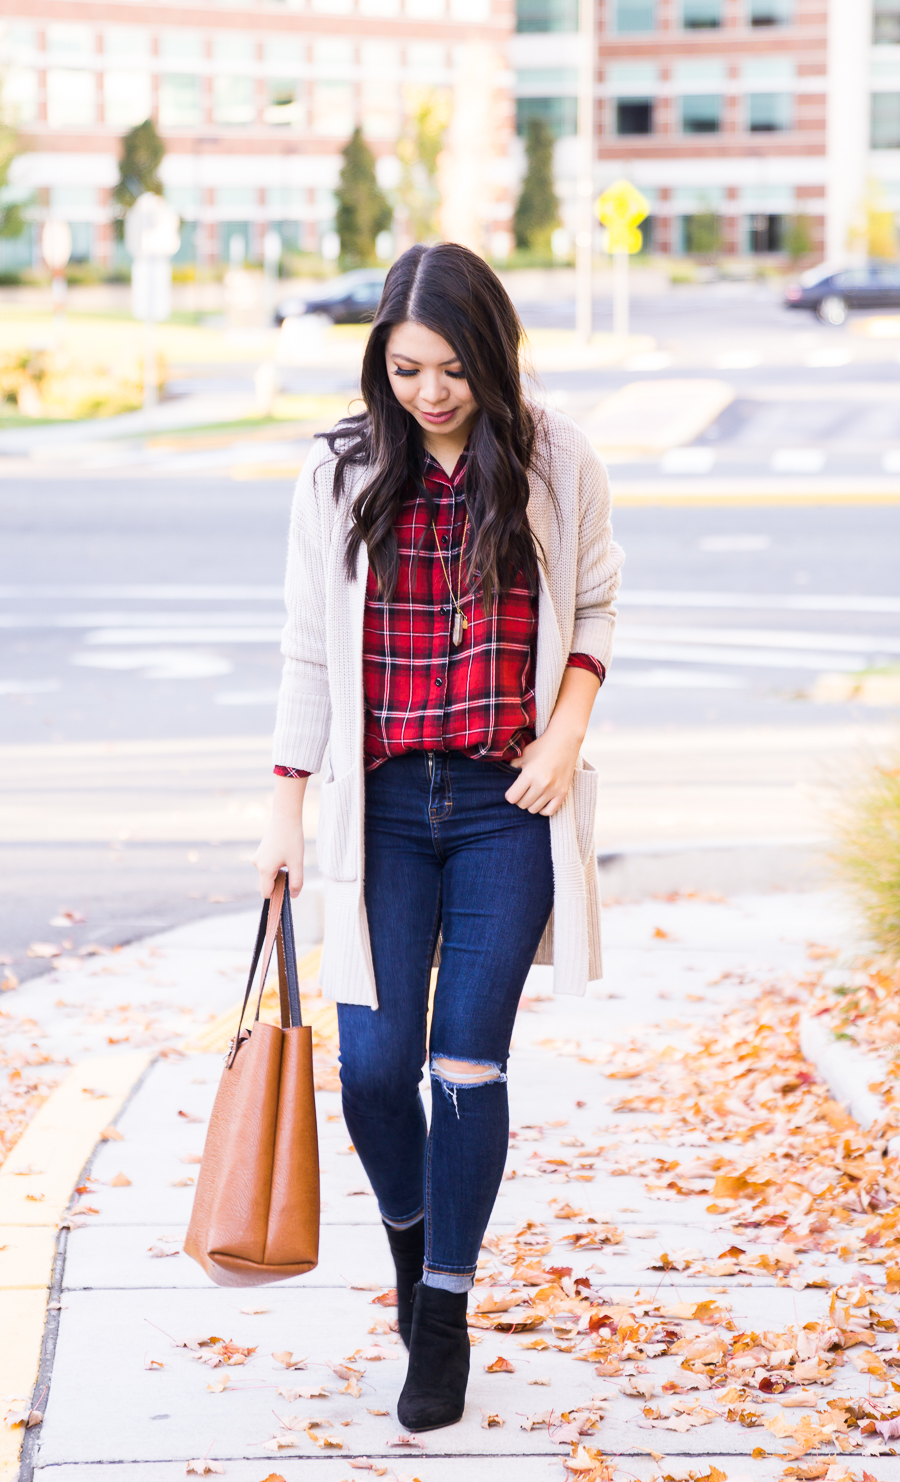 red long cardigan outfit